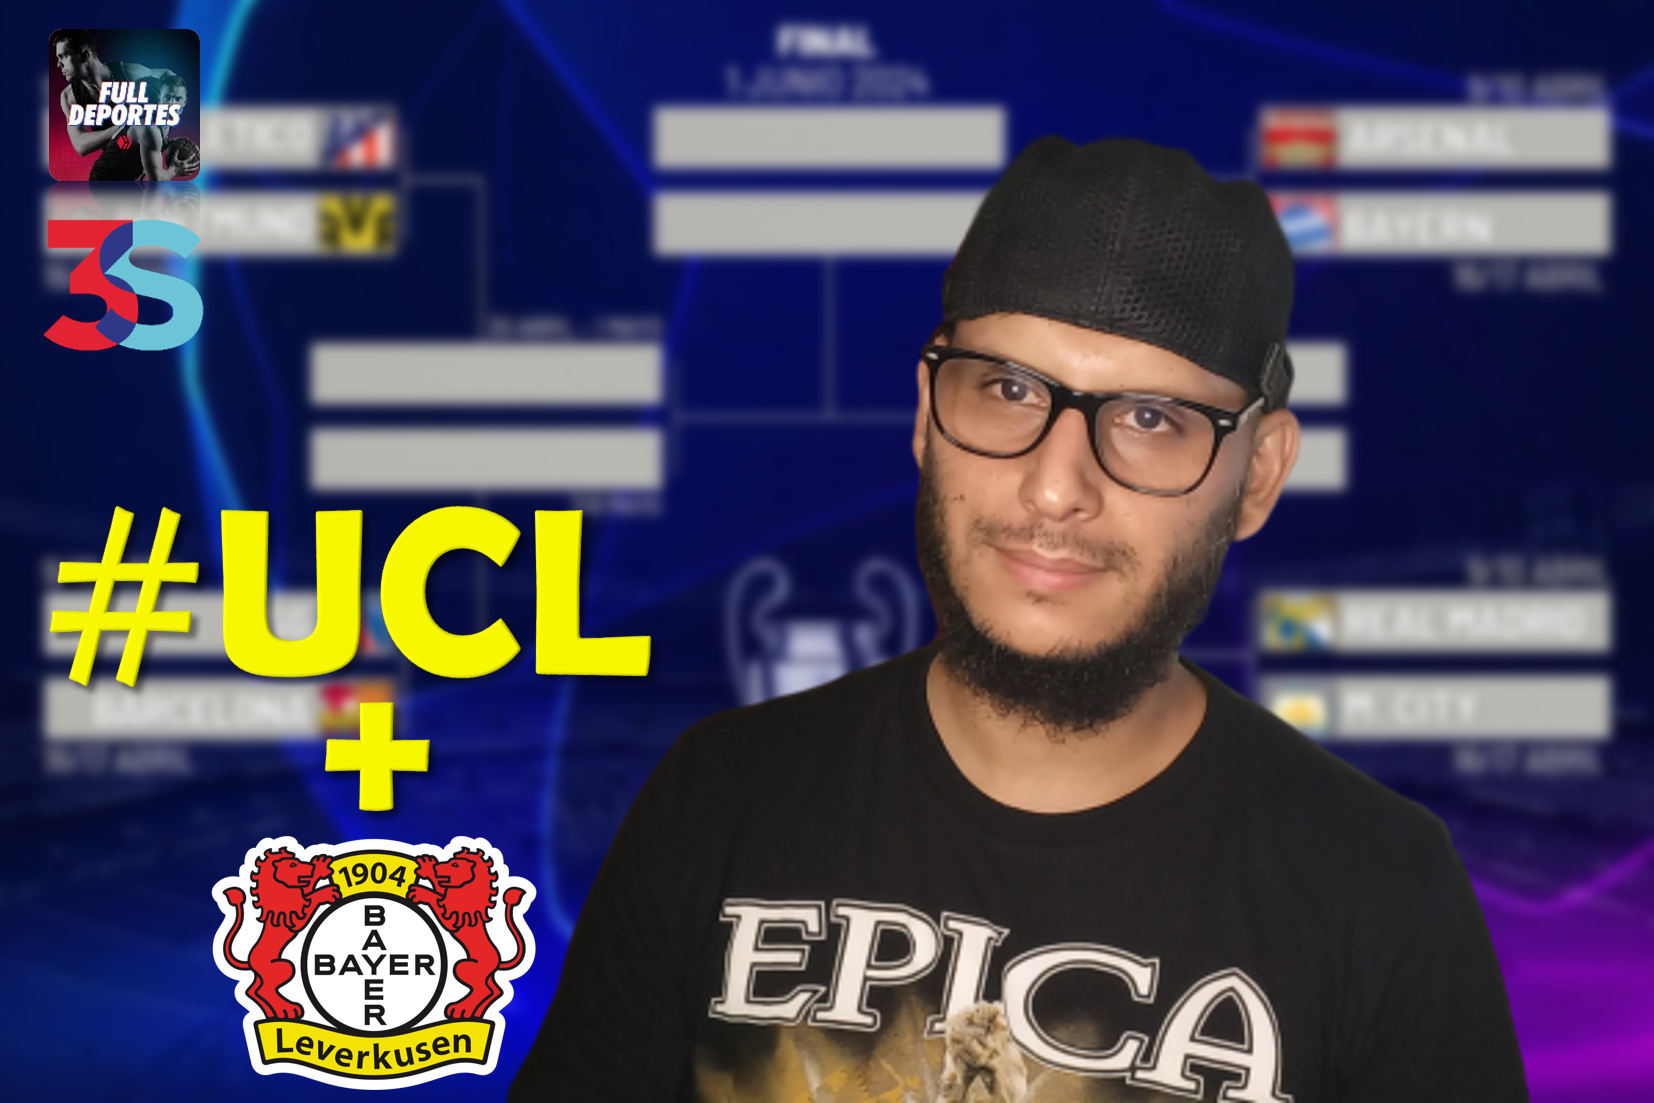 ucl.png